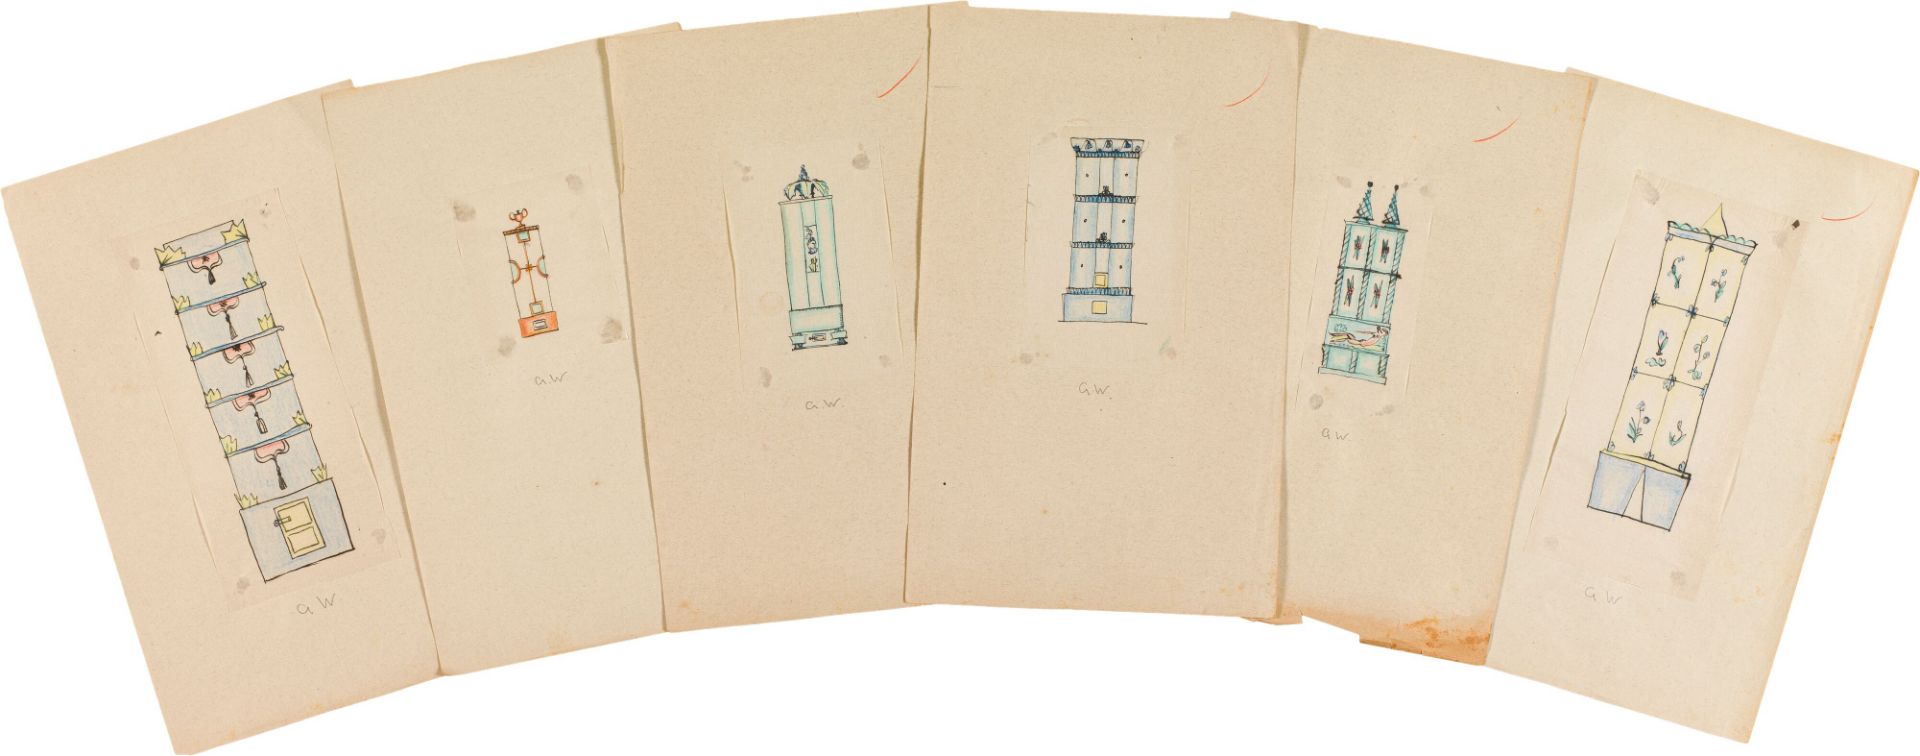 Dagobert PecheSix draft drawings for tiled stovesGmunden, c. 1919coloured pencil and India ink on